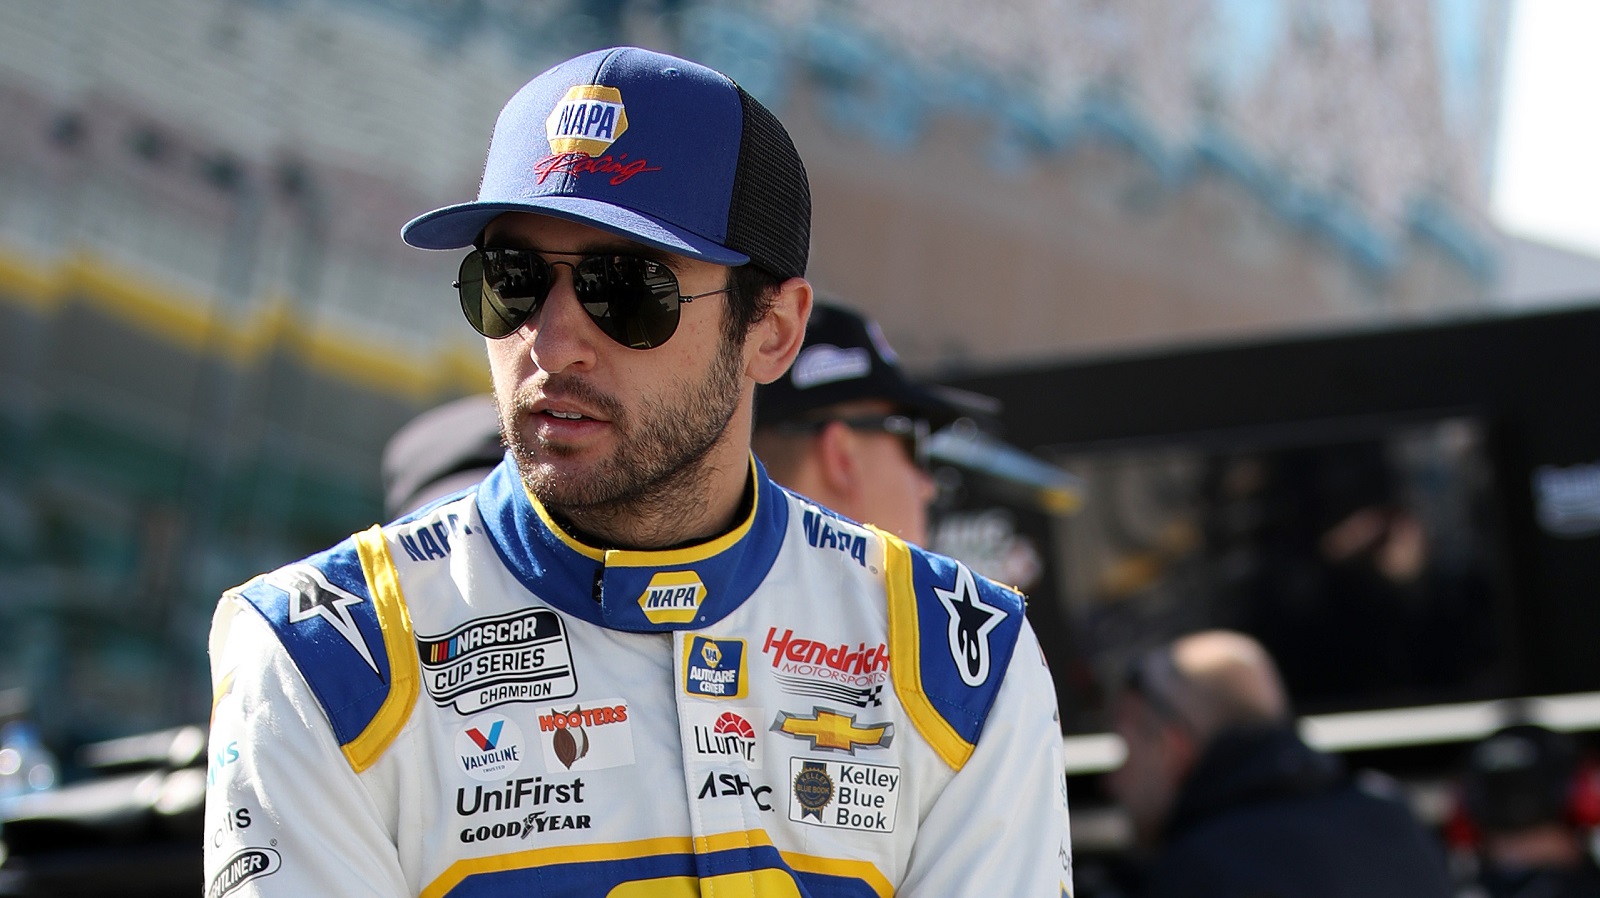 NASCAR Weekend Preview: Chase Elliott’s Great Opportunity at COTA to Break Into the Win Column